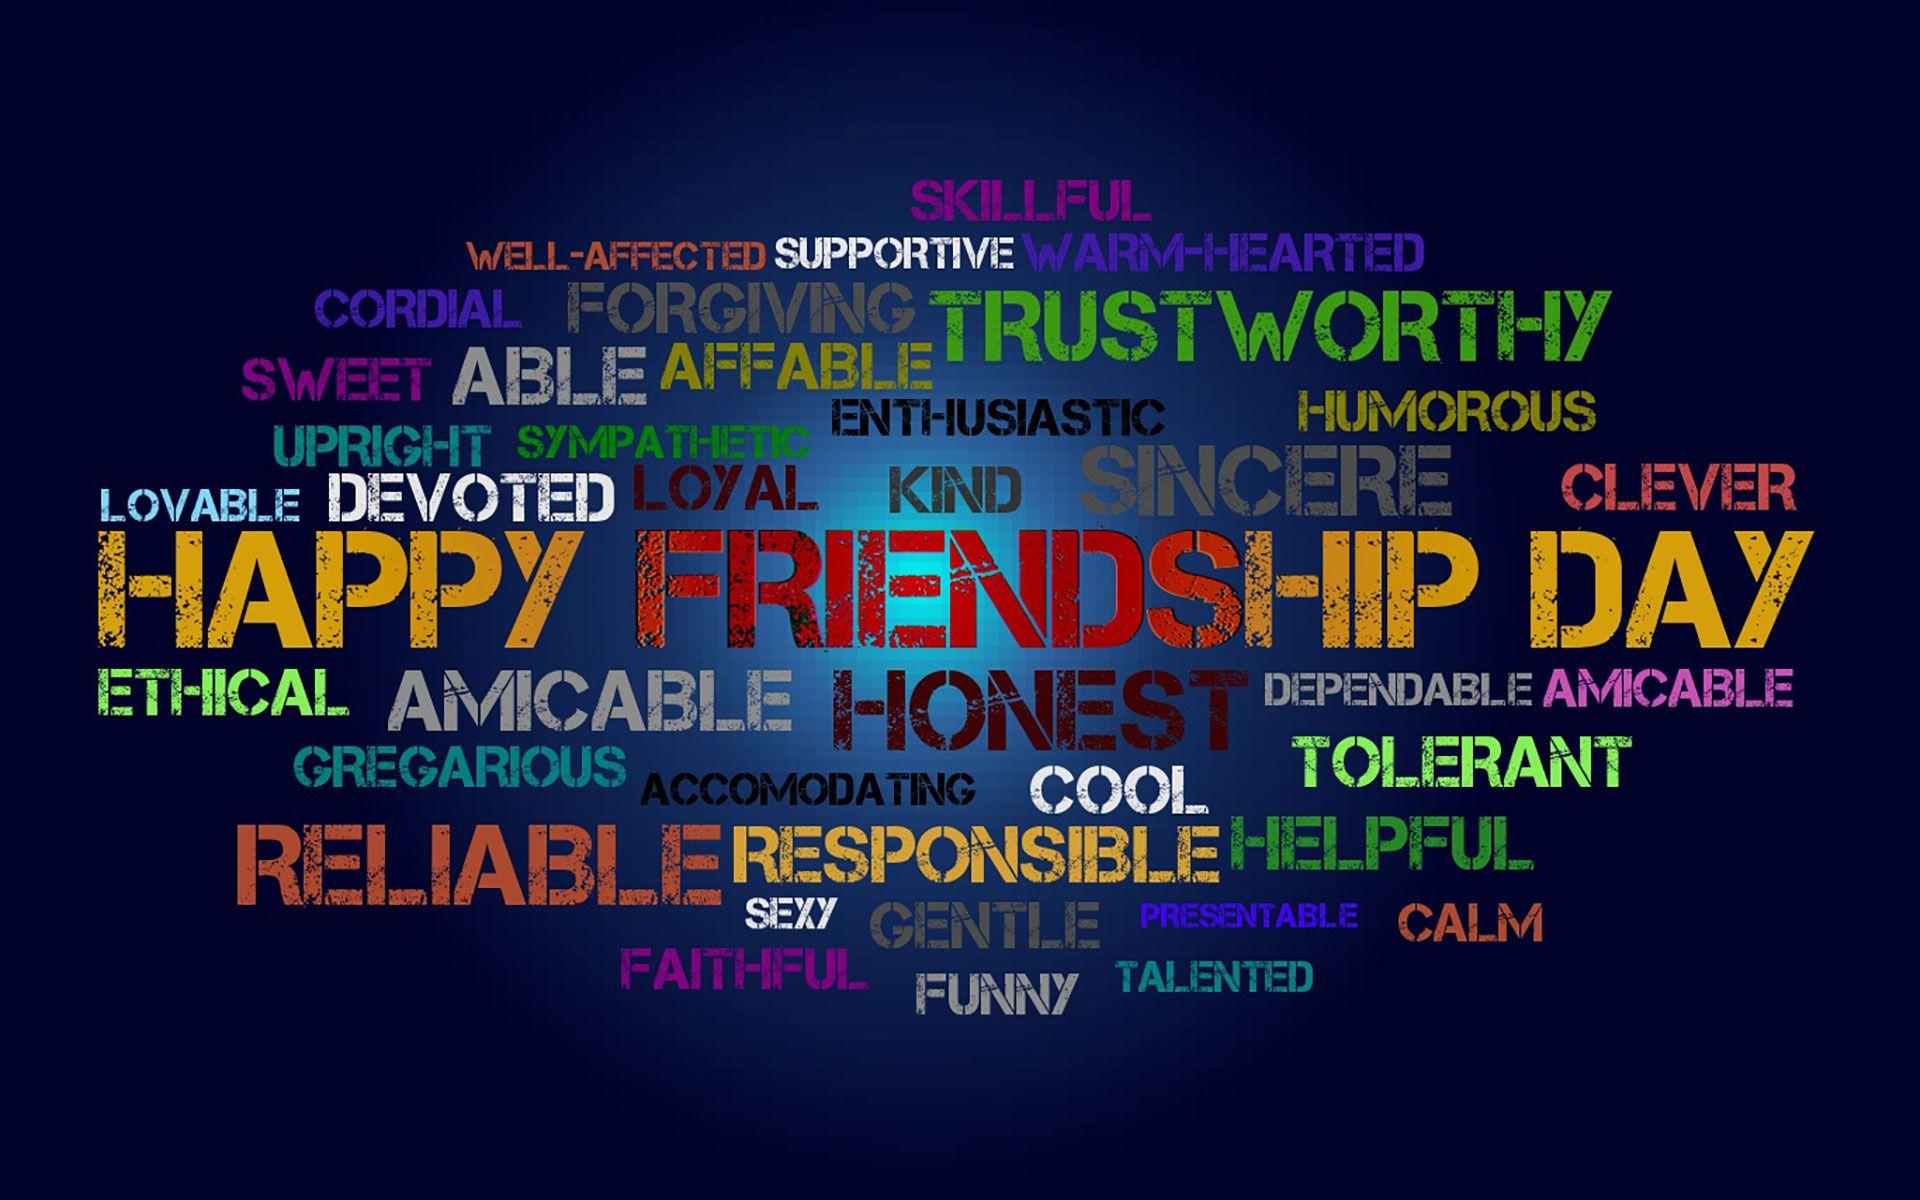 Free download HD Friendship Day Image with Quotes. These Cute